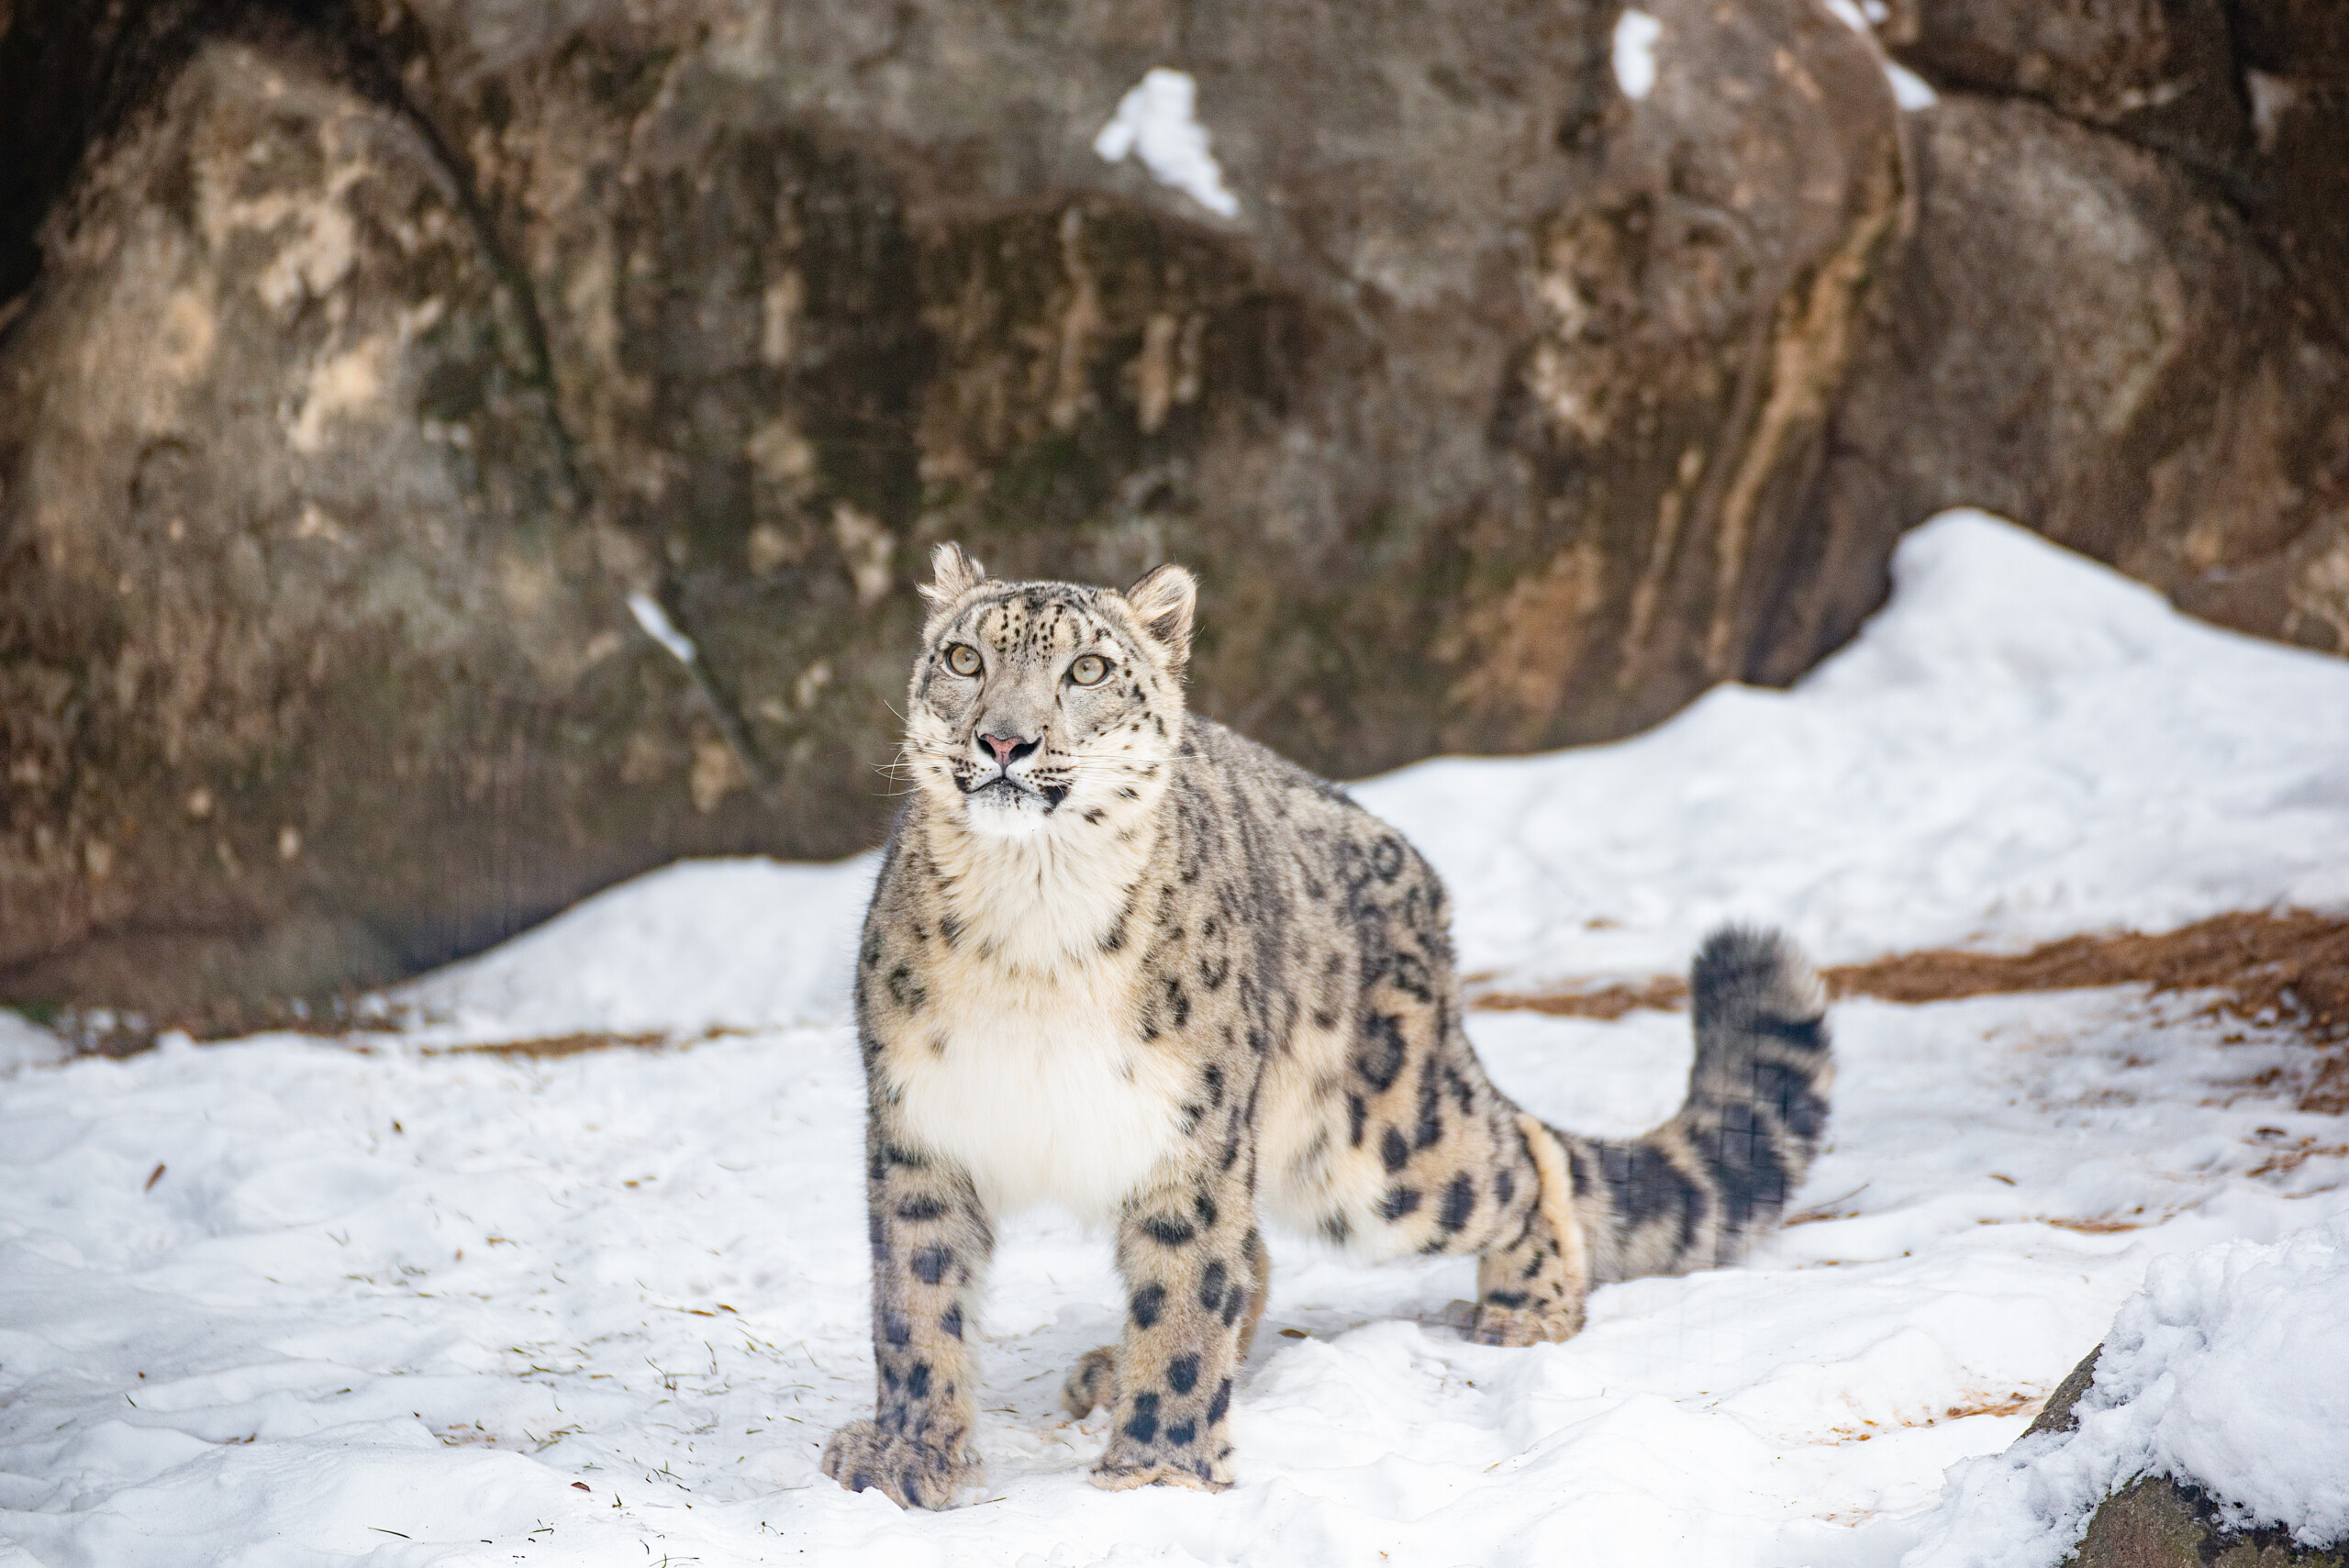 Snow leopard Marcy enjoys the cold weather in her habitat at Philadelphia Zoo.